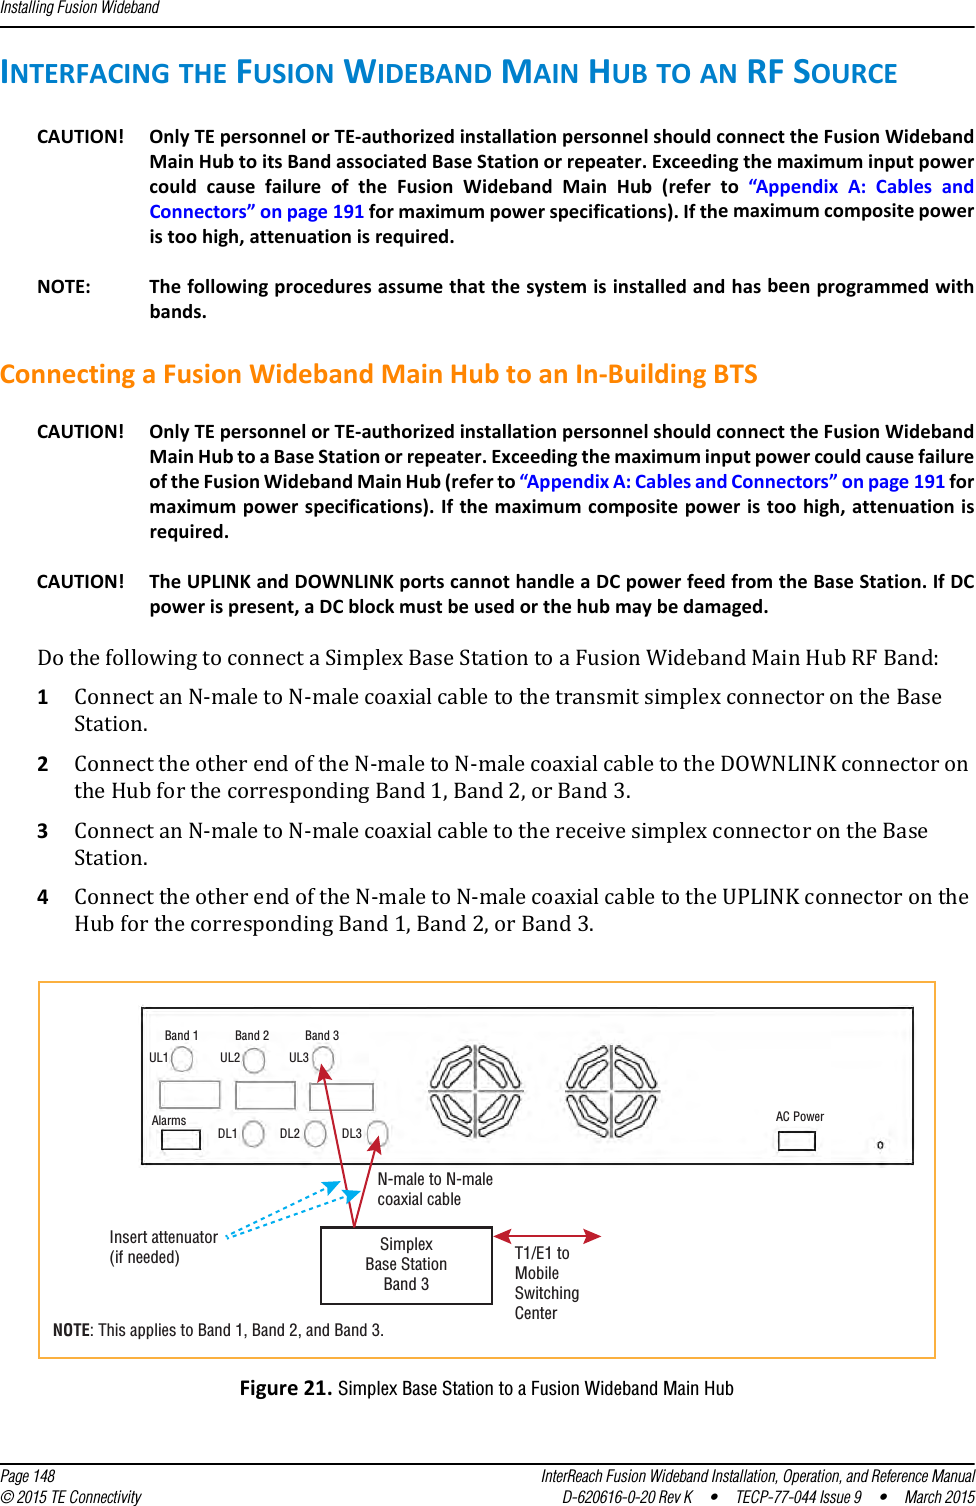 Installing Fusion Wideband  Page 148 InterReach Fusion Wideband Installation, Operation, and Reference Manual© 2015 TE Connectivity D-620616-0-20 Rev K  •  TECP-77-044 Issue 9  •  March 2015INTERFACING THE FUSION WIDEBAND MAIN HUB TO AN RF SOURCECAUTION! Only TE personnel or TE-authorized installation personnel should connect the Fusion Wideband Main Hub to its Band associated Base Station or repeater. Exceeding the maximum input power could cause failure of the Fusion Wideband Main Hub (refer to “Appendix A: Cables and Connectors” on page 191 for maximum power specifications). If the maximum composite power is too high, attenuation is required.NOTE: The following procedures assume that the system is installed and has been programmed with bands. Connecting a Fusion Wideband Main Hub to an In-Building BTSCAUTION! Only TE personnel or TE-authorized installation personnel should connect the Fusion Wideband Main Hub to a Base Station or repeater. Exceeding the maximum input power could cause failure of the Fusion Wideband Main Hub (refer to “Appendix A: Cables and Connectors” on page 191 for maximum power specifications). If the maximum composite power is too high, attenuation is required.CAUTION! The UPLINK and DOWNLINK ports cannot handle a DC power feed from the Base Station. If DC power is present, a DC block must be used or the hub may be damaged.Do the following to connect a Simplex Base Station to a Fusion Wideband Main Hub RF Band:1Connect an N-male to N-male coaxial cable to the transmit simplex connector on the Base Station.2Connect the other end of the N-male to N-male coaxial cable to the DOWNLINK connector on the Hub for the corresponding Band 1, Band 2, or Band 3.3Connect an N-male to N-male coaxial cable to the receive simplex connector on the Base Station.4Connect the other end of the N-male to N-male coaxial cable to the UPLINK connector on the Hub for the corresponding Band 1, Band 2, or Band 3.Figure 21. Simplex Base Station to a Fusion Wideband Main Hub SimplexBase StationBand 3Band 1 Band 2 Band 3UL1 UL2 UL3AlarmsDL1 DL2 DL3AC PowerN-male to N-malecoaxial cableT1/E1 toMobileSwitchingCenterInsert attenuator(if needed)NOTE: This applies to Band 1, Band 2, and Band 3.